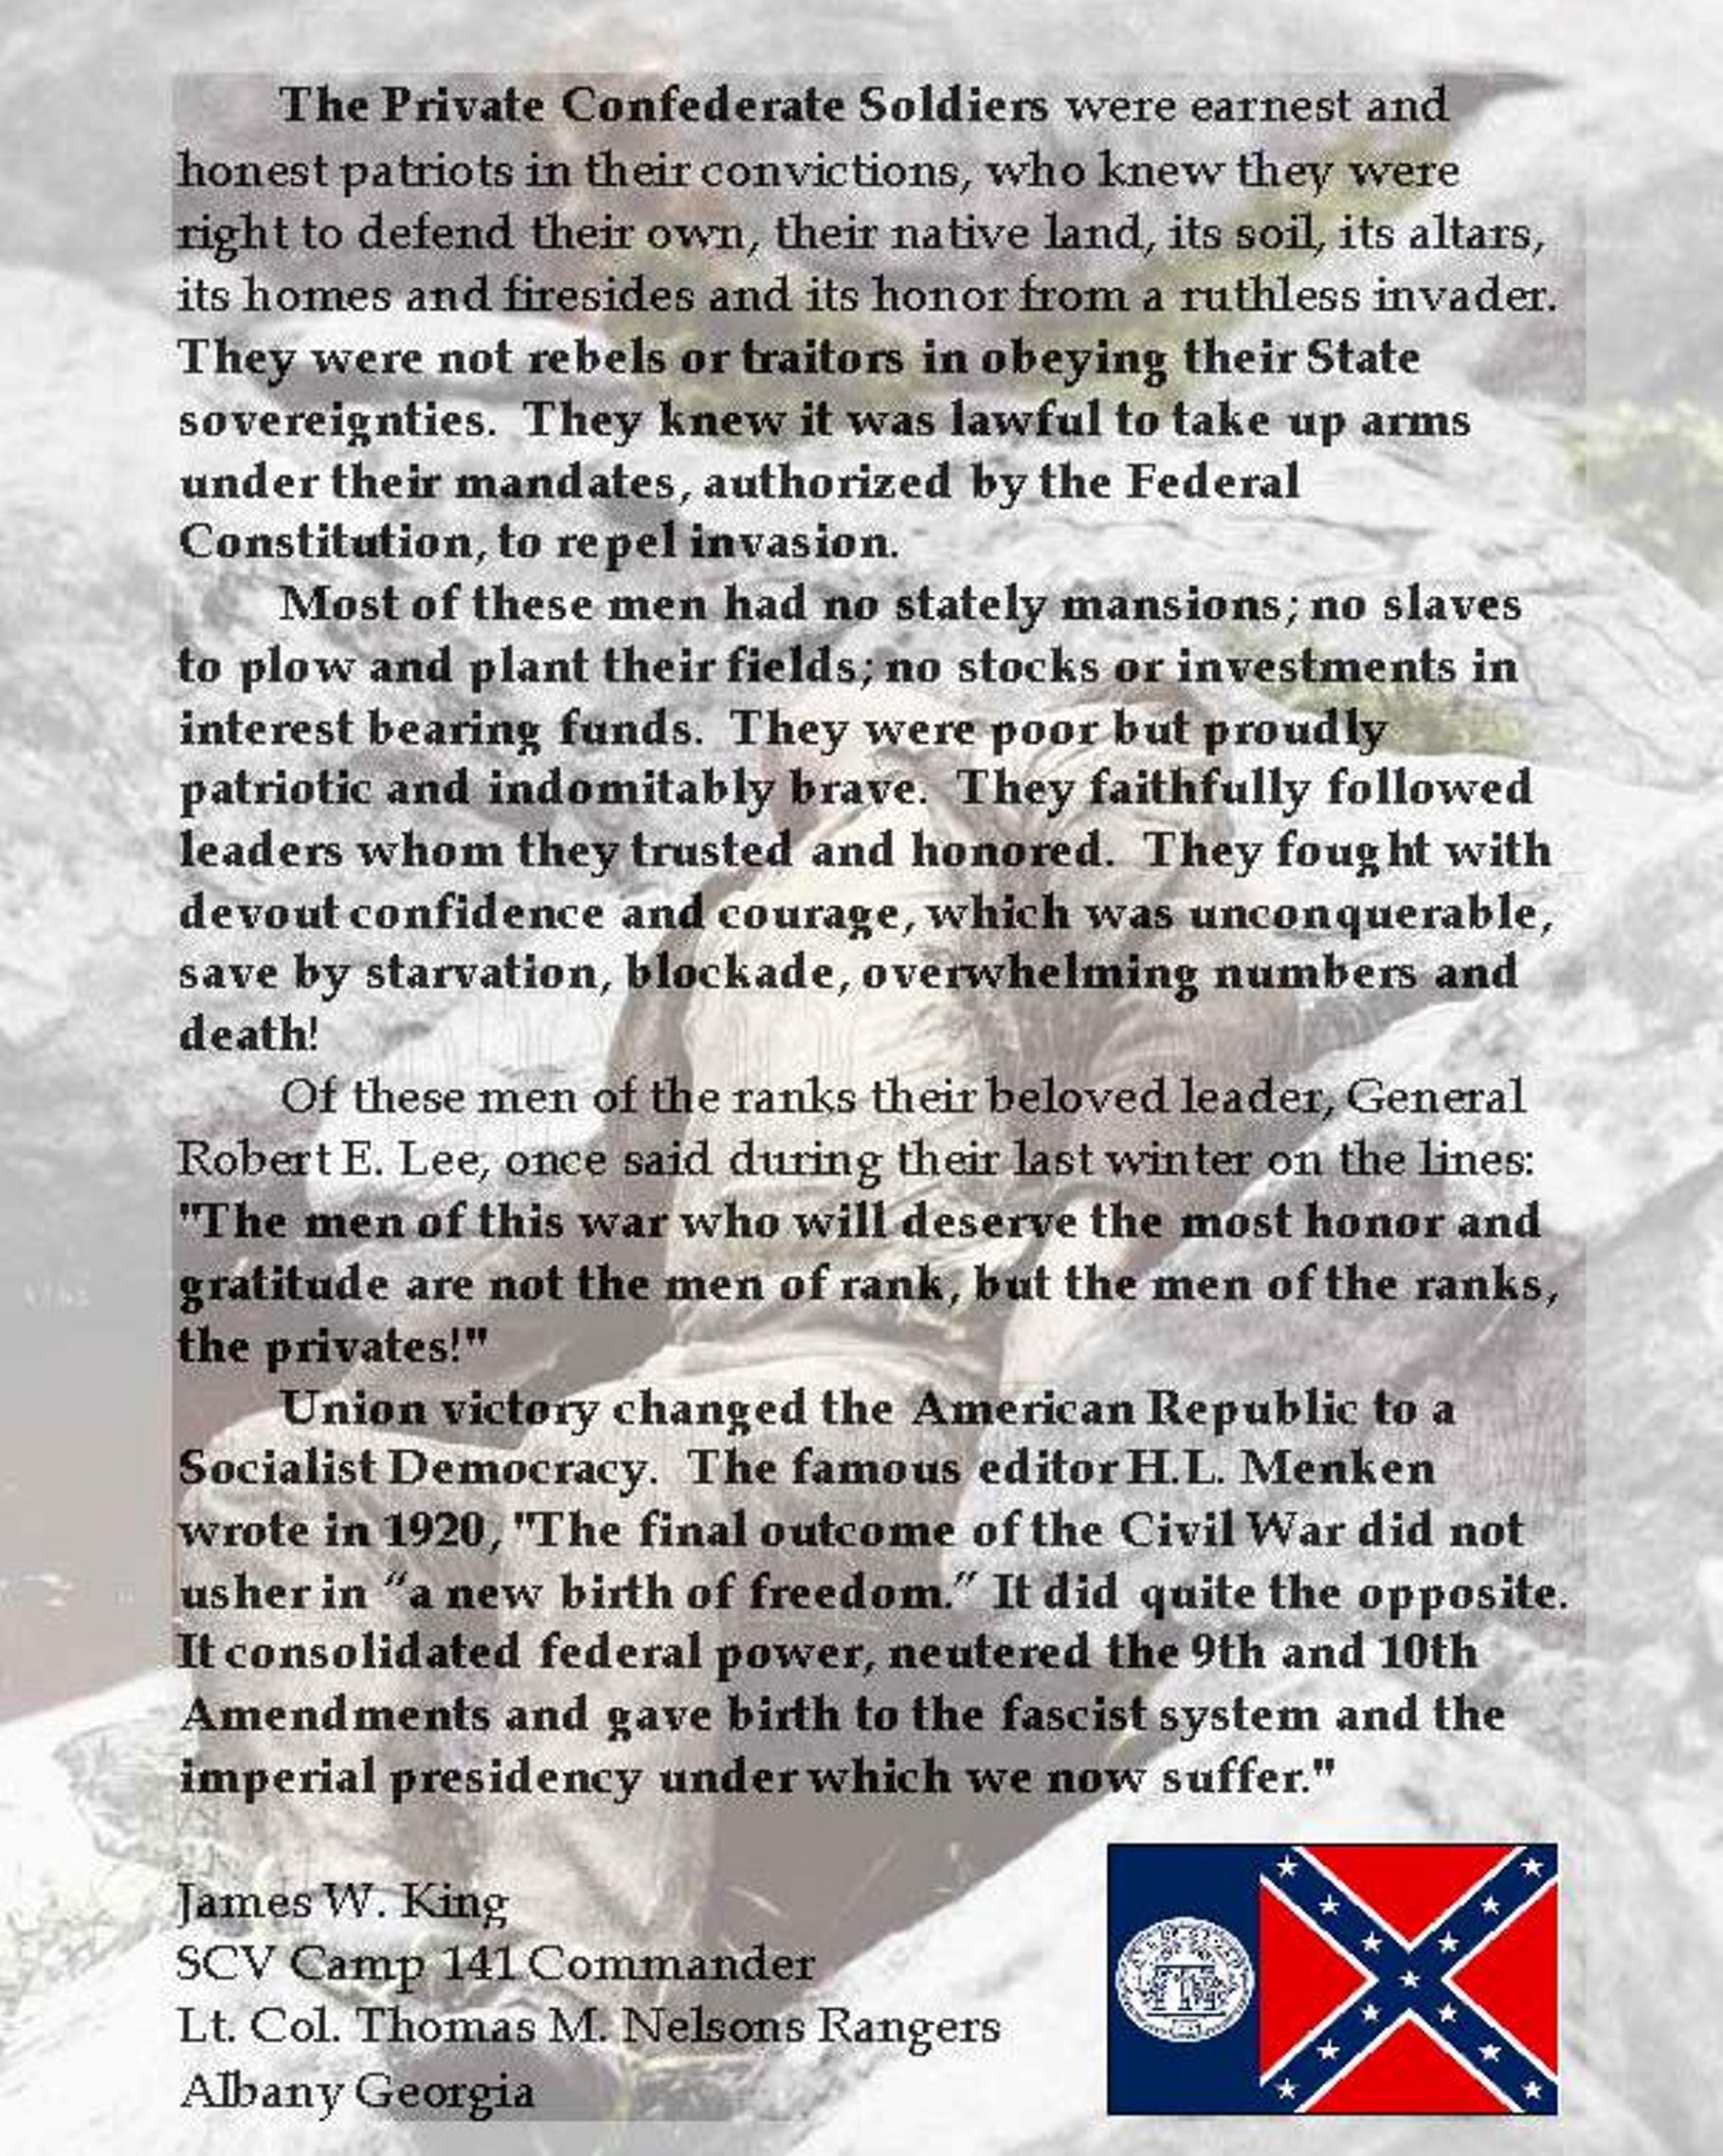 The Private Confederate Soldiers were earnest and honest patriots in their convictions